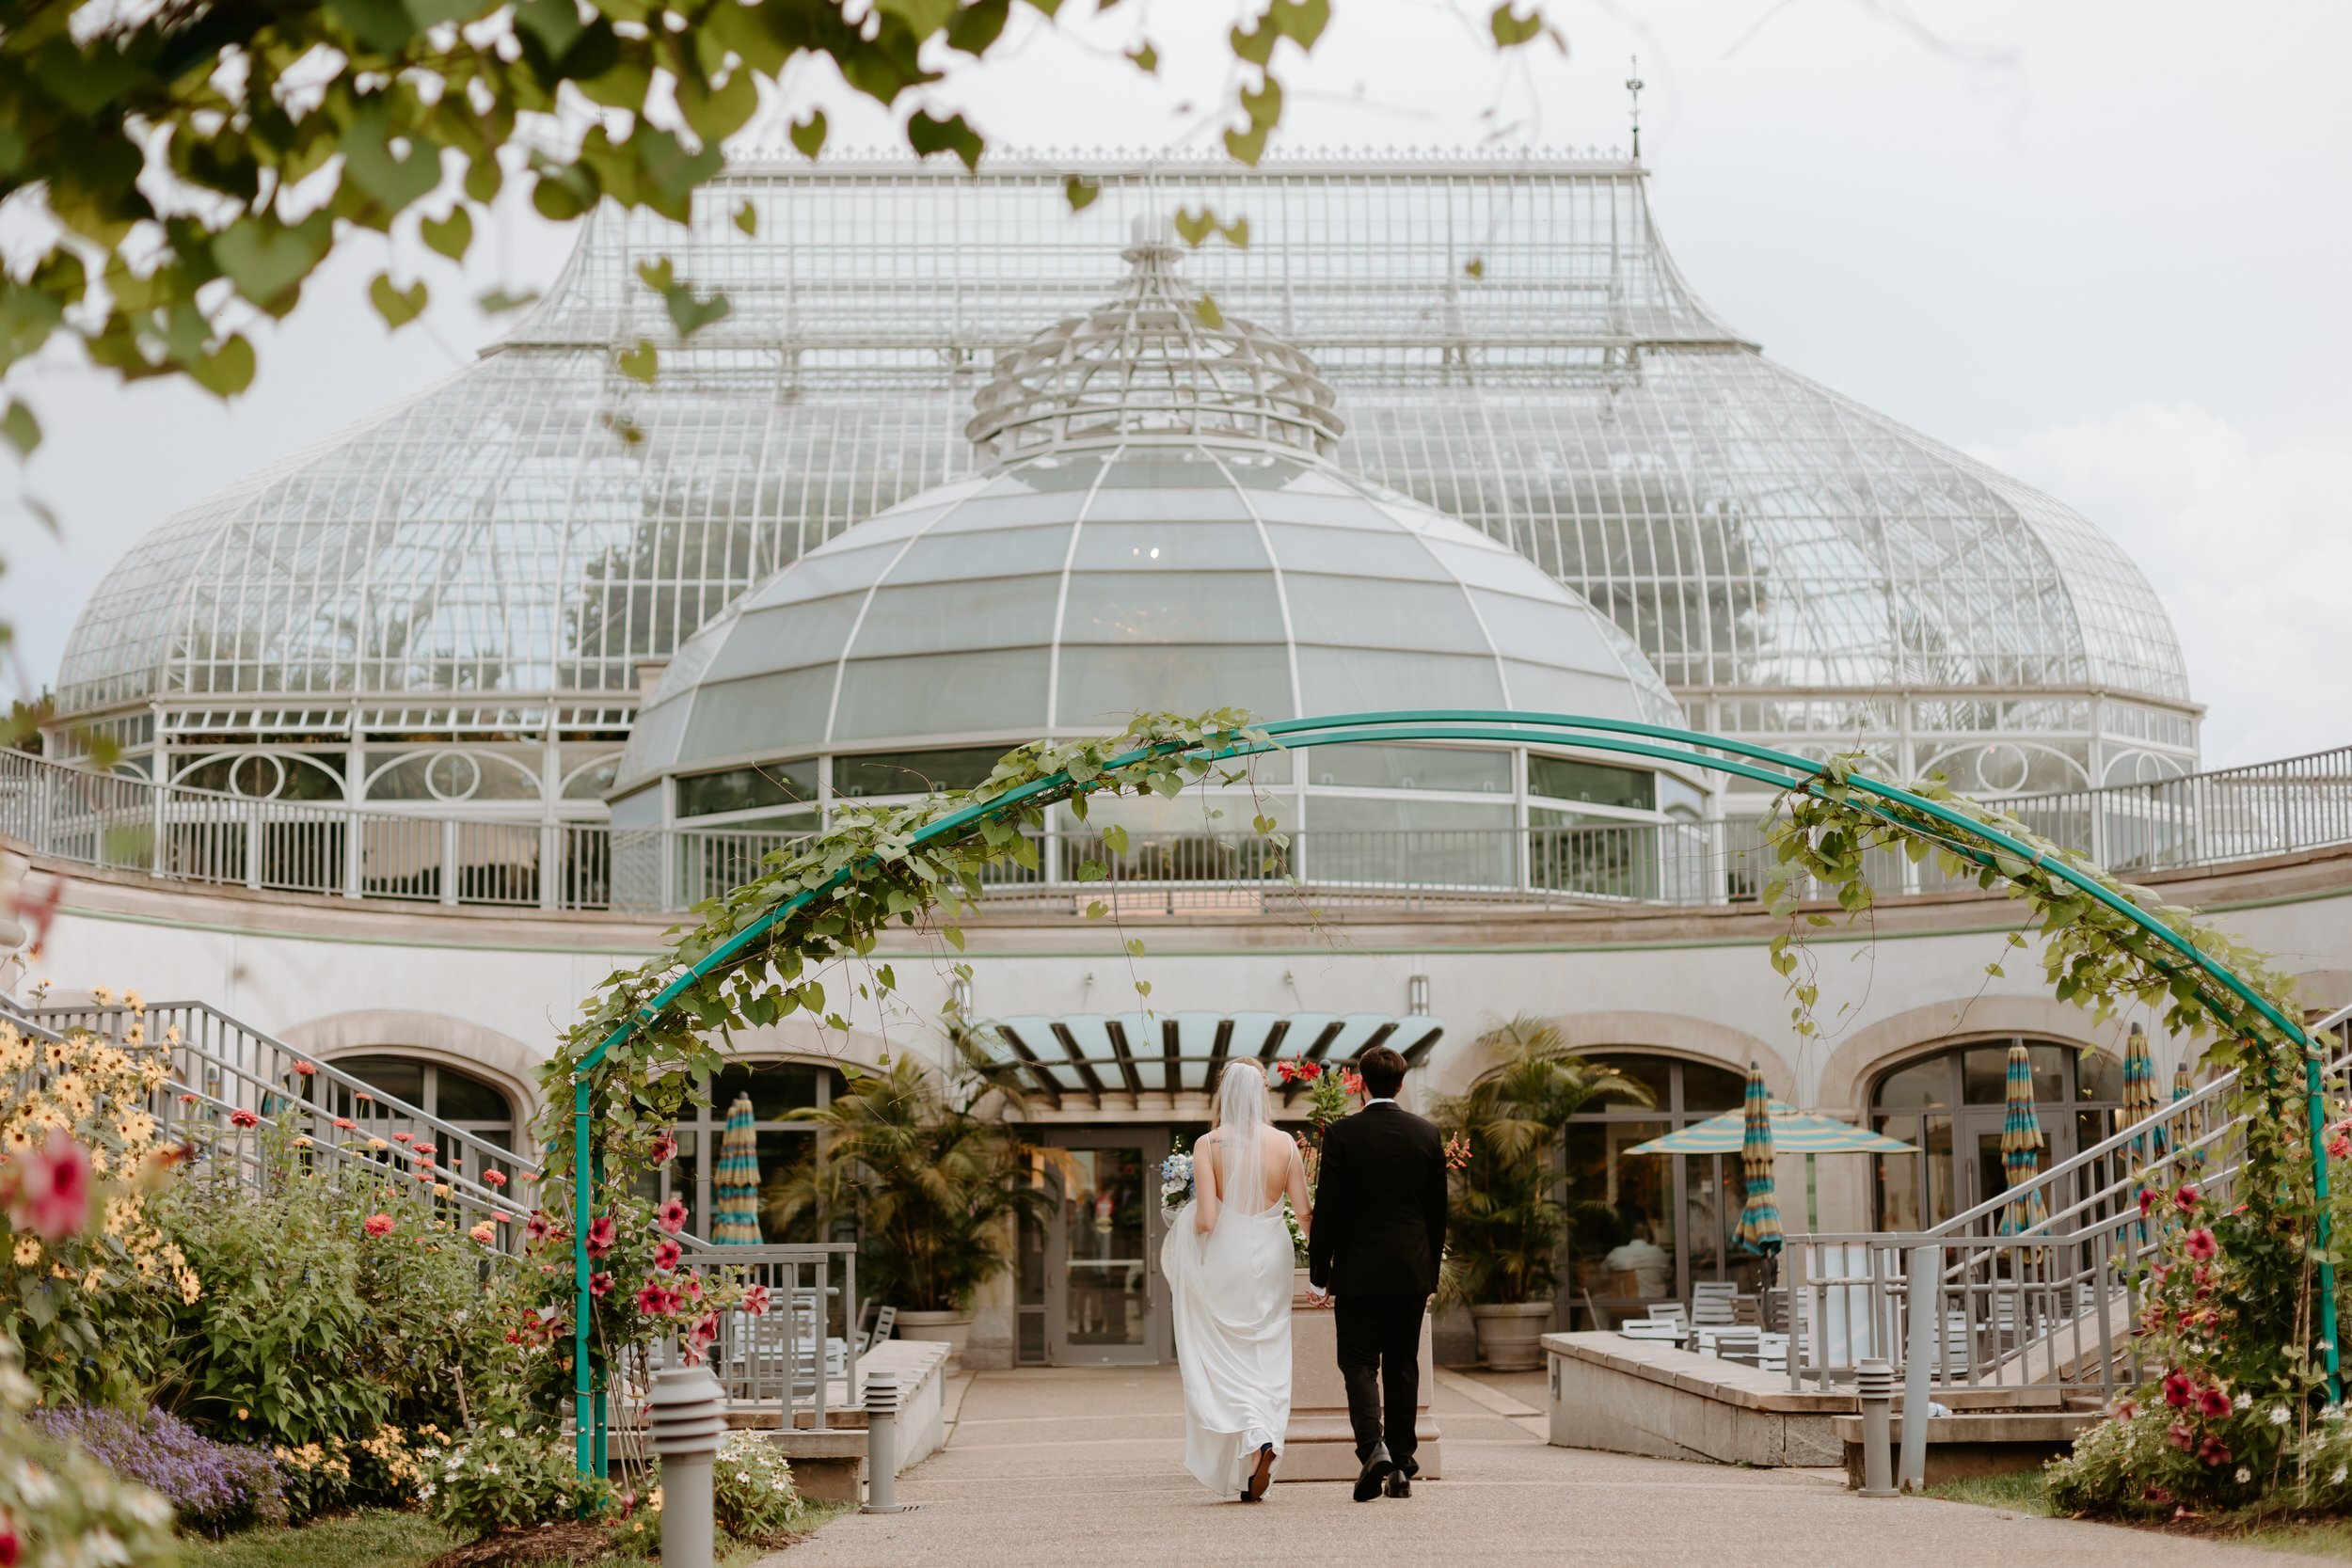  Man and woman walk holding hands in front of Phipps Conservatory.  